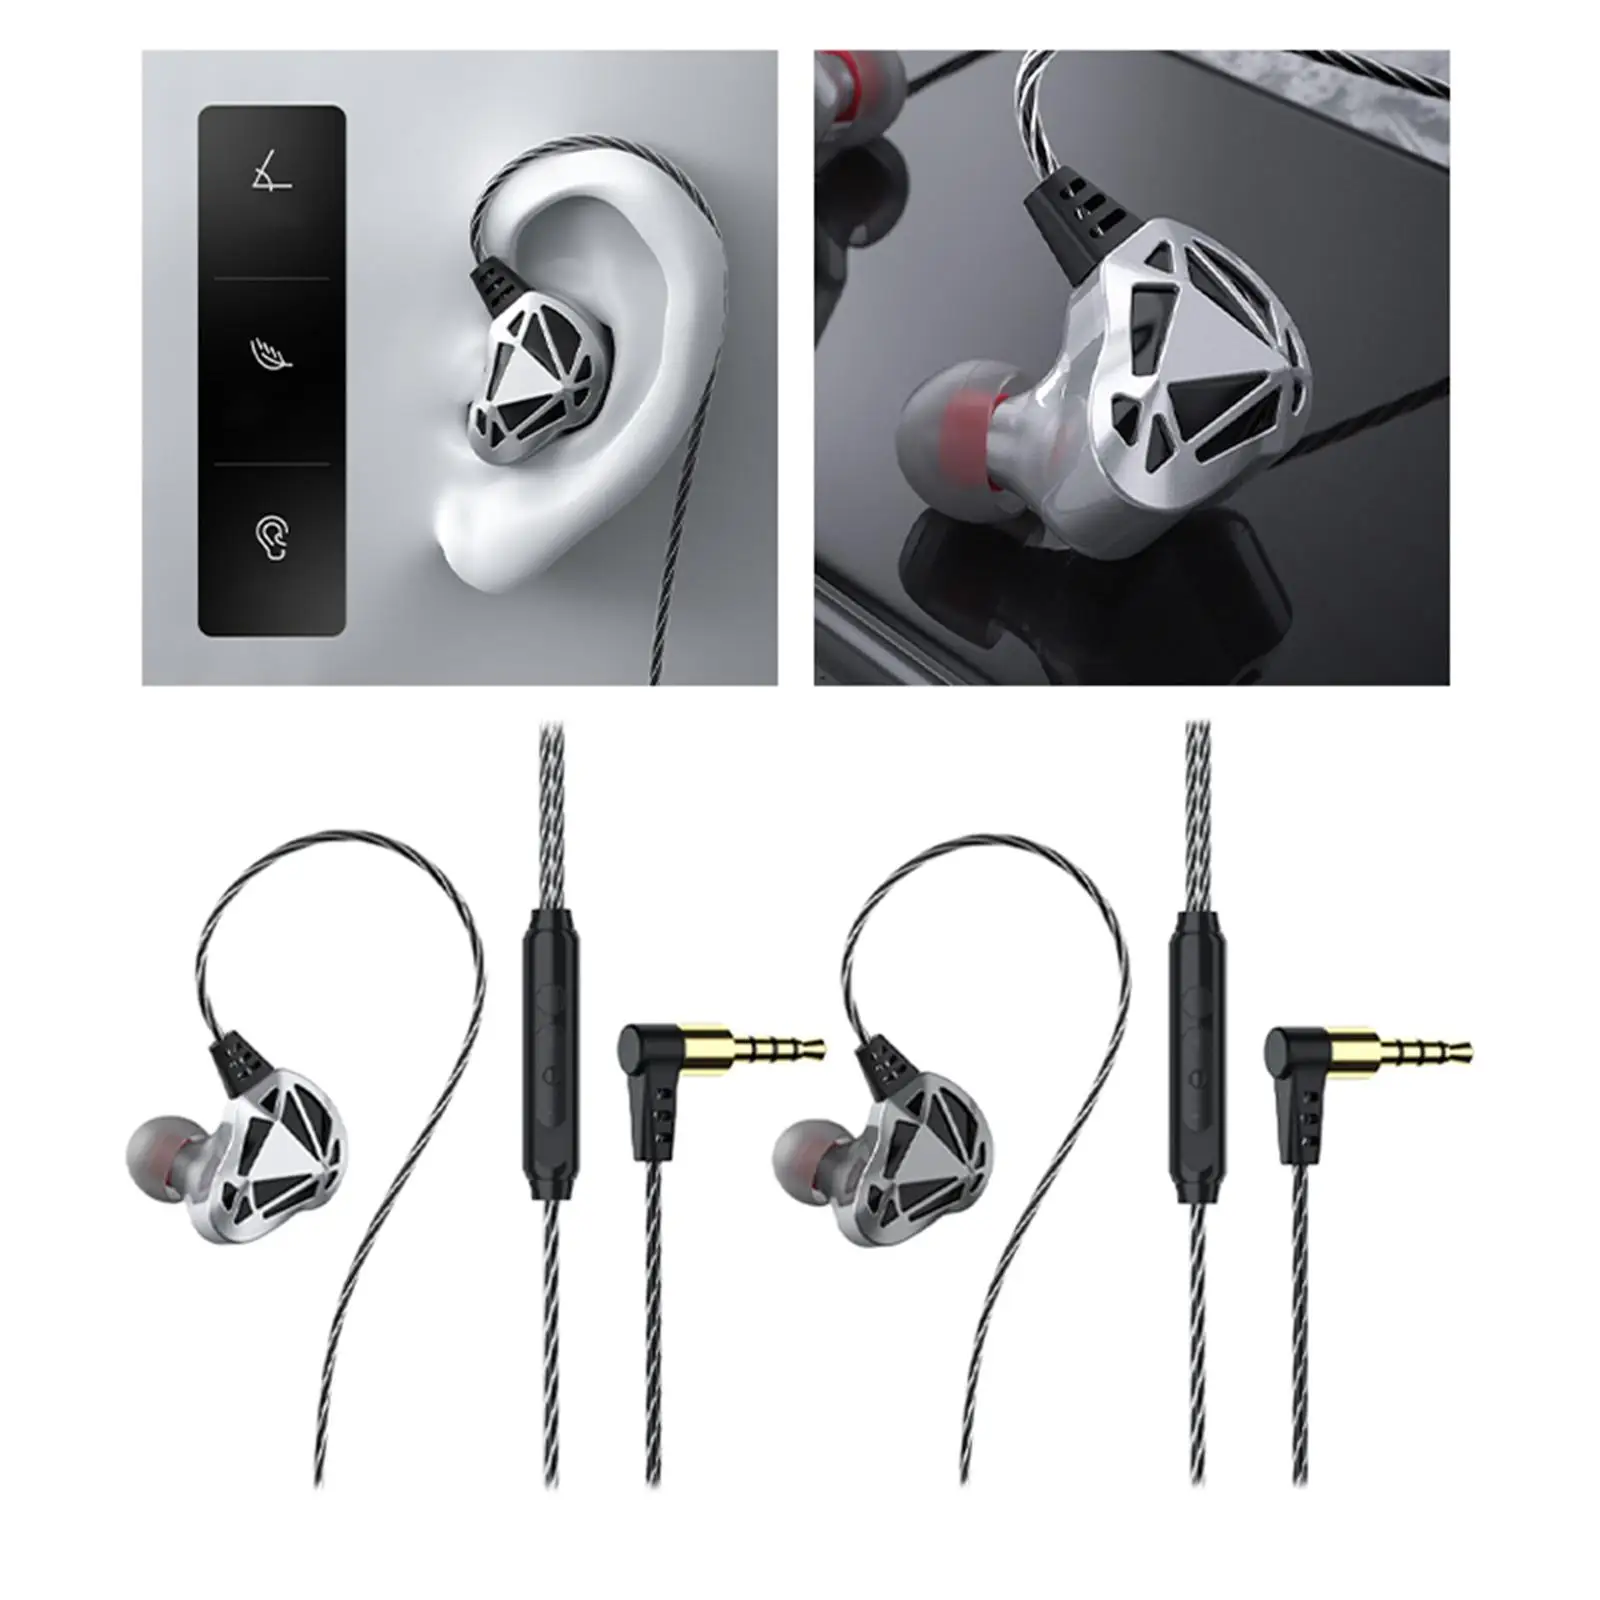 Earphones Wired 3.5mm Plug Jack with Mic Comfort wearing Sports Earbuds for Exercise Gym